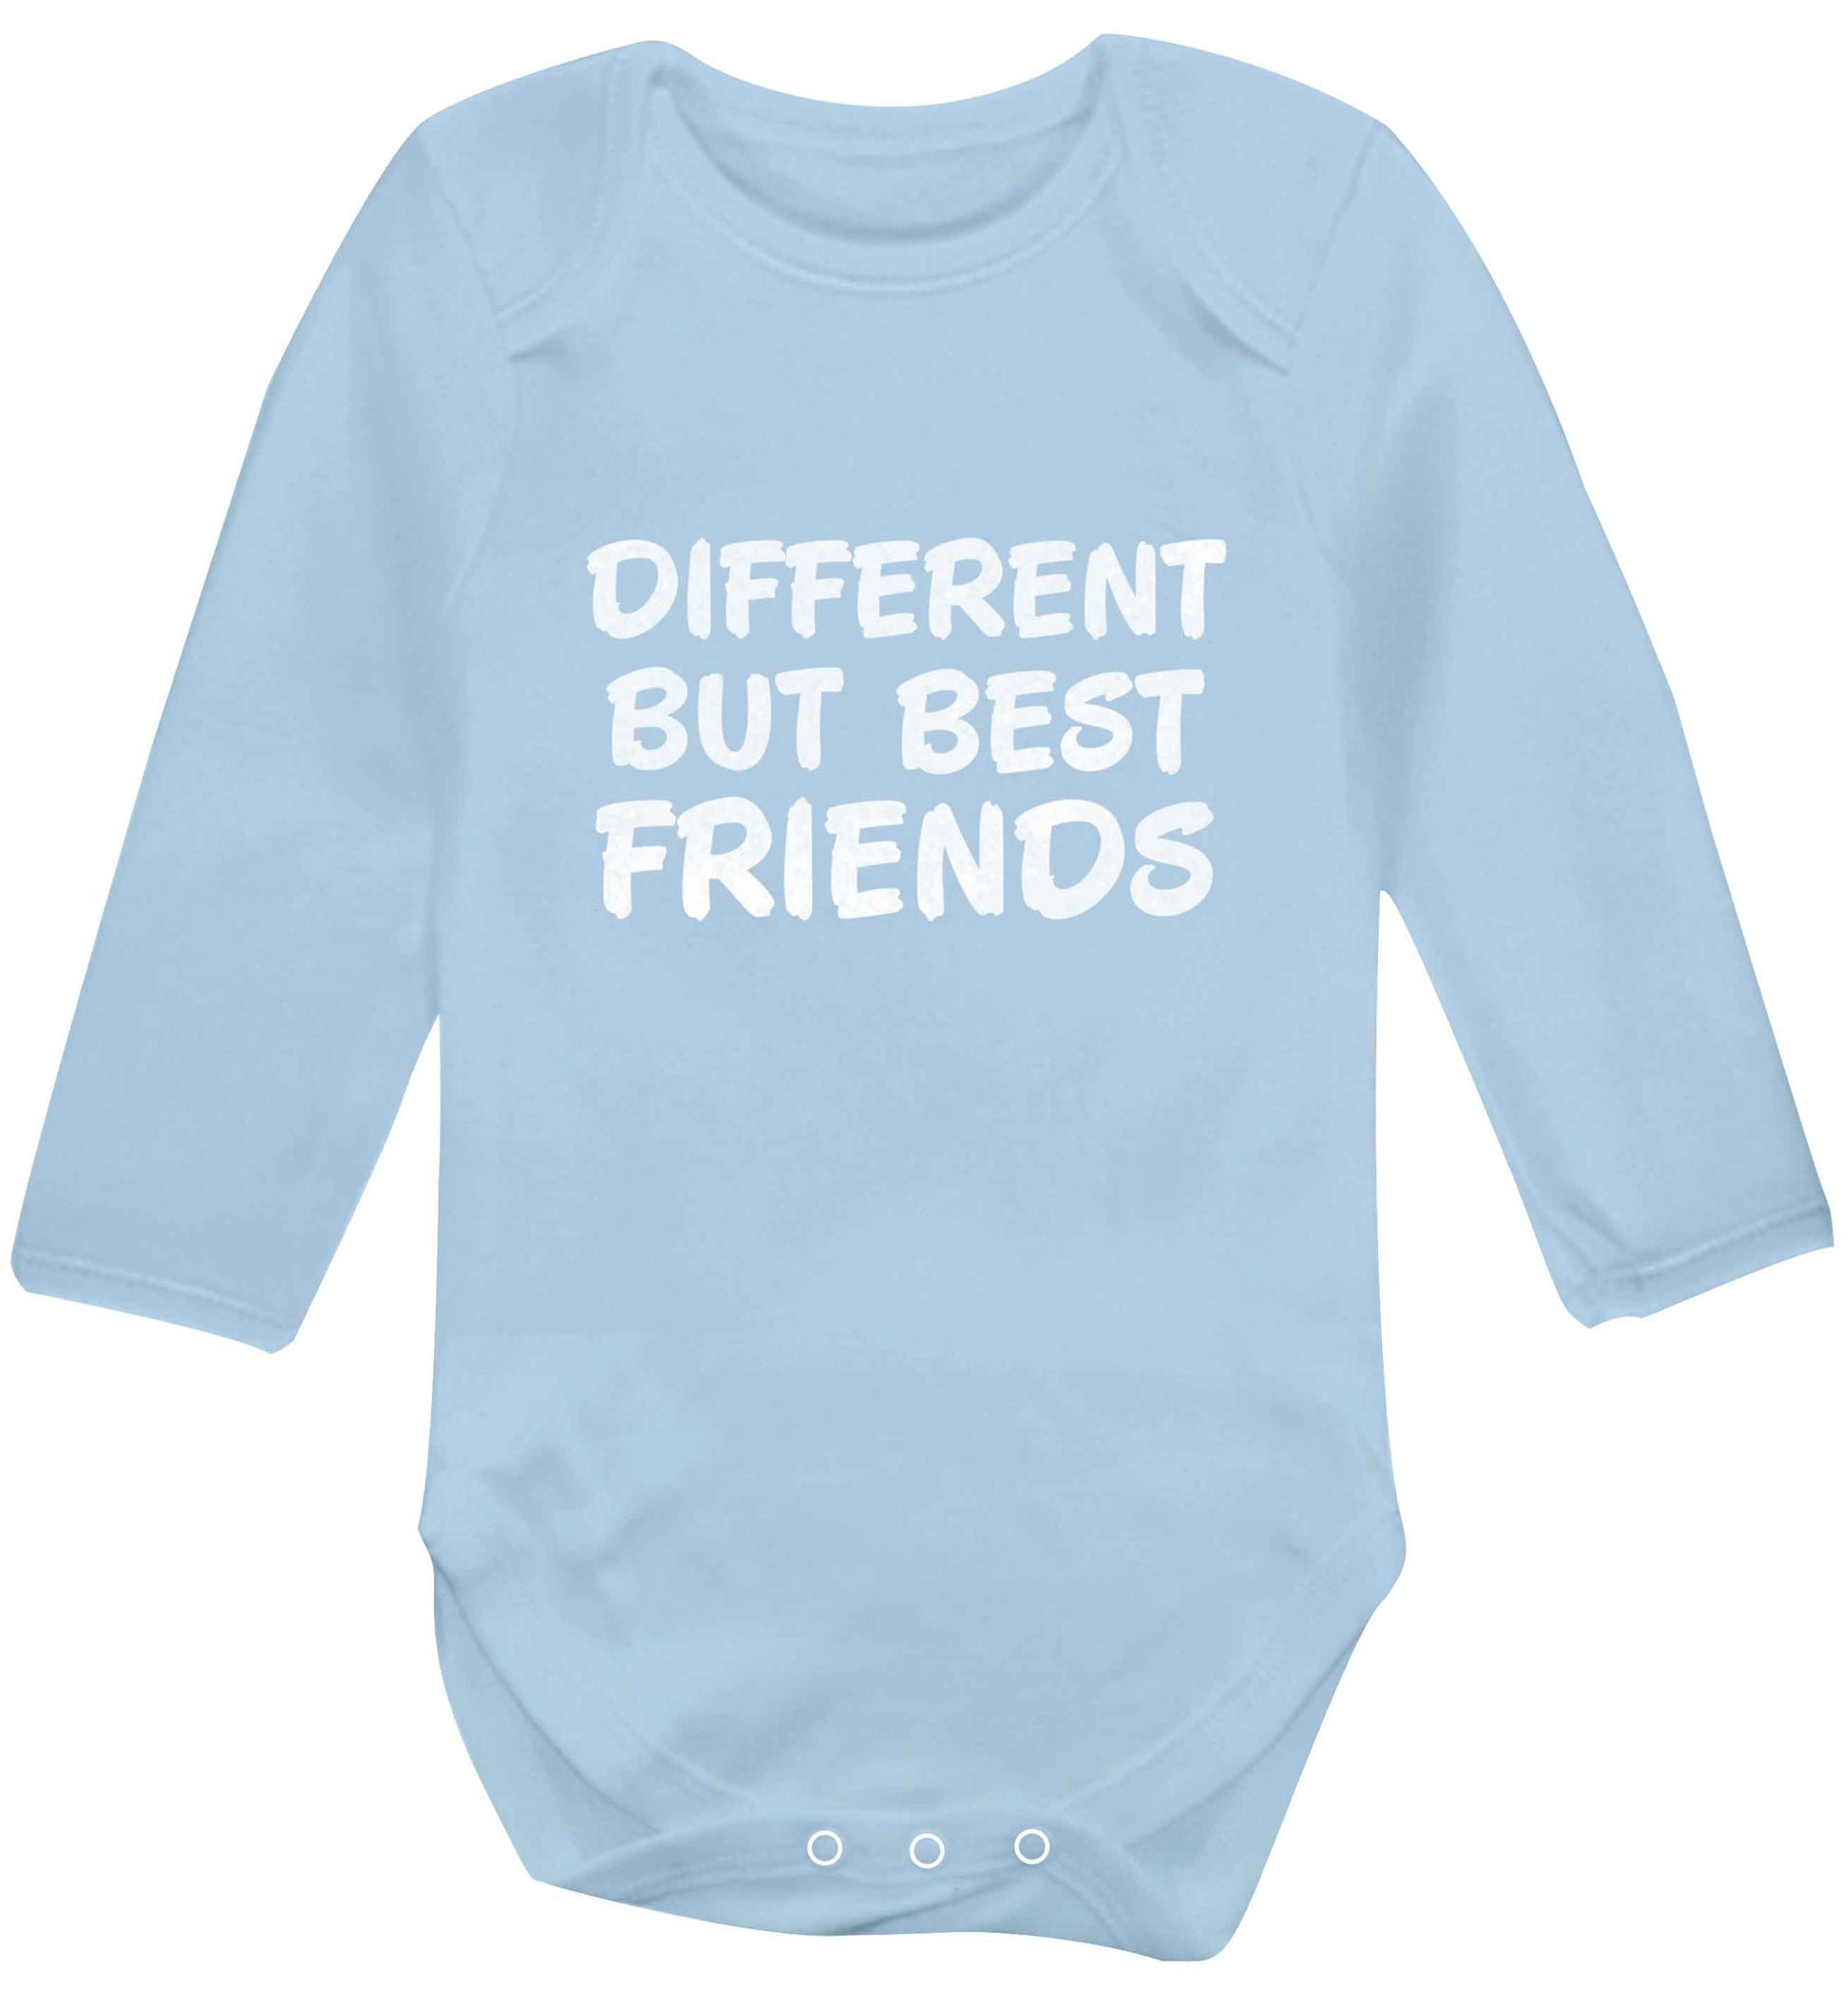 Different but best friends baby vest long sleeved pale blue 6-12 months